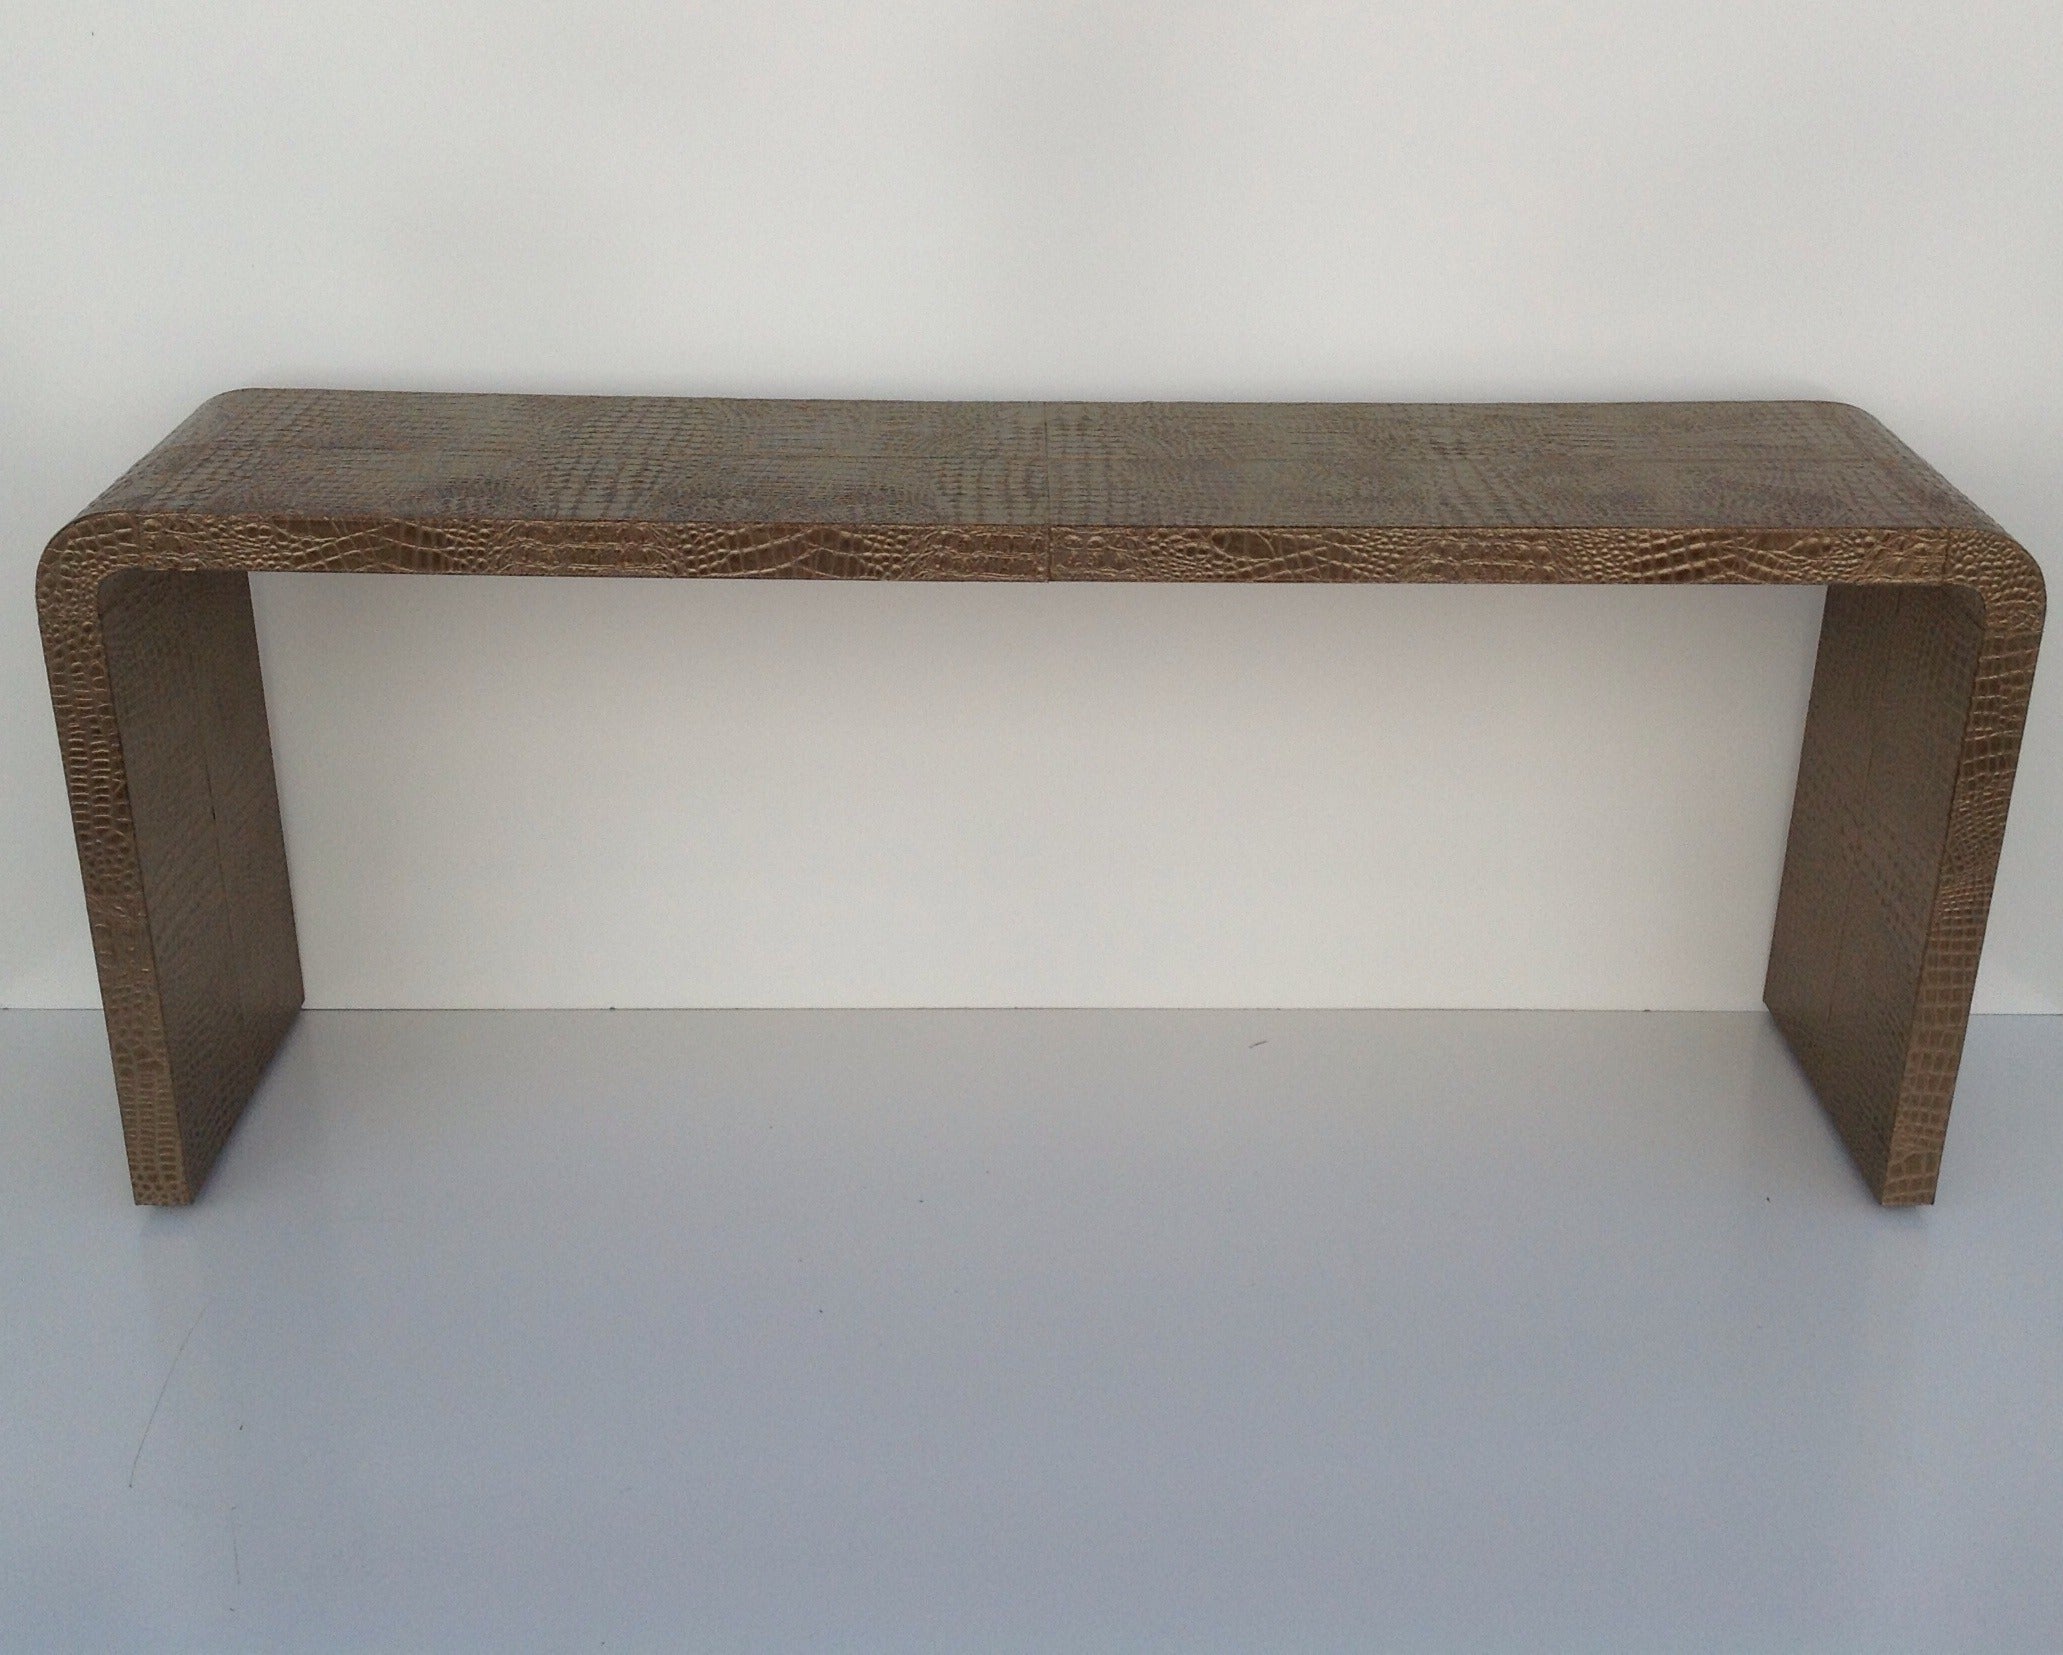 Gorgeous Leather Console Table with a Faux Crocodile Design